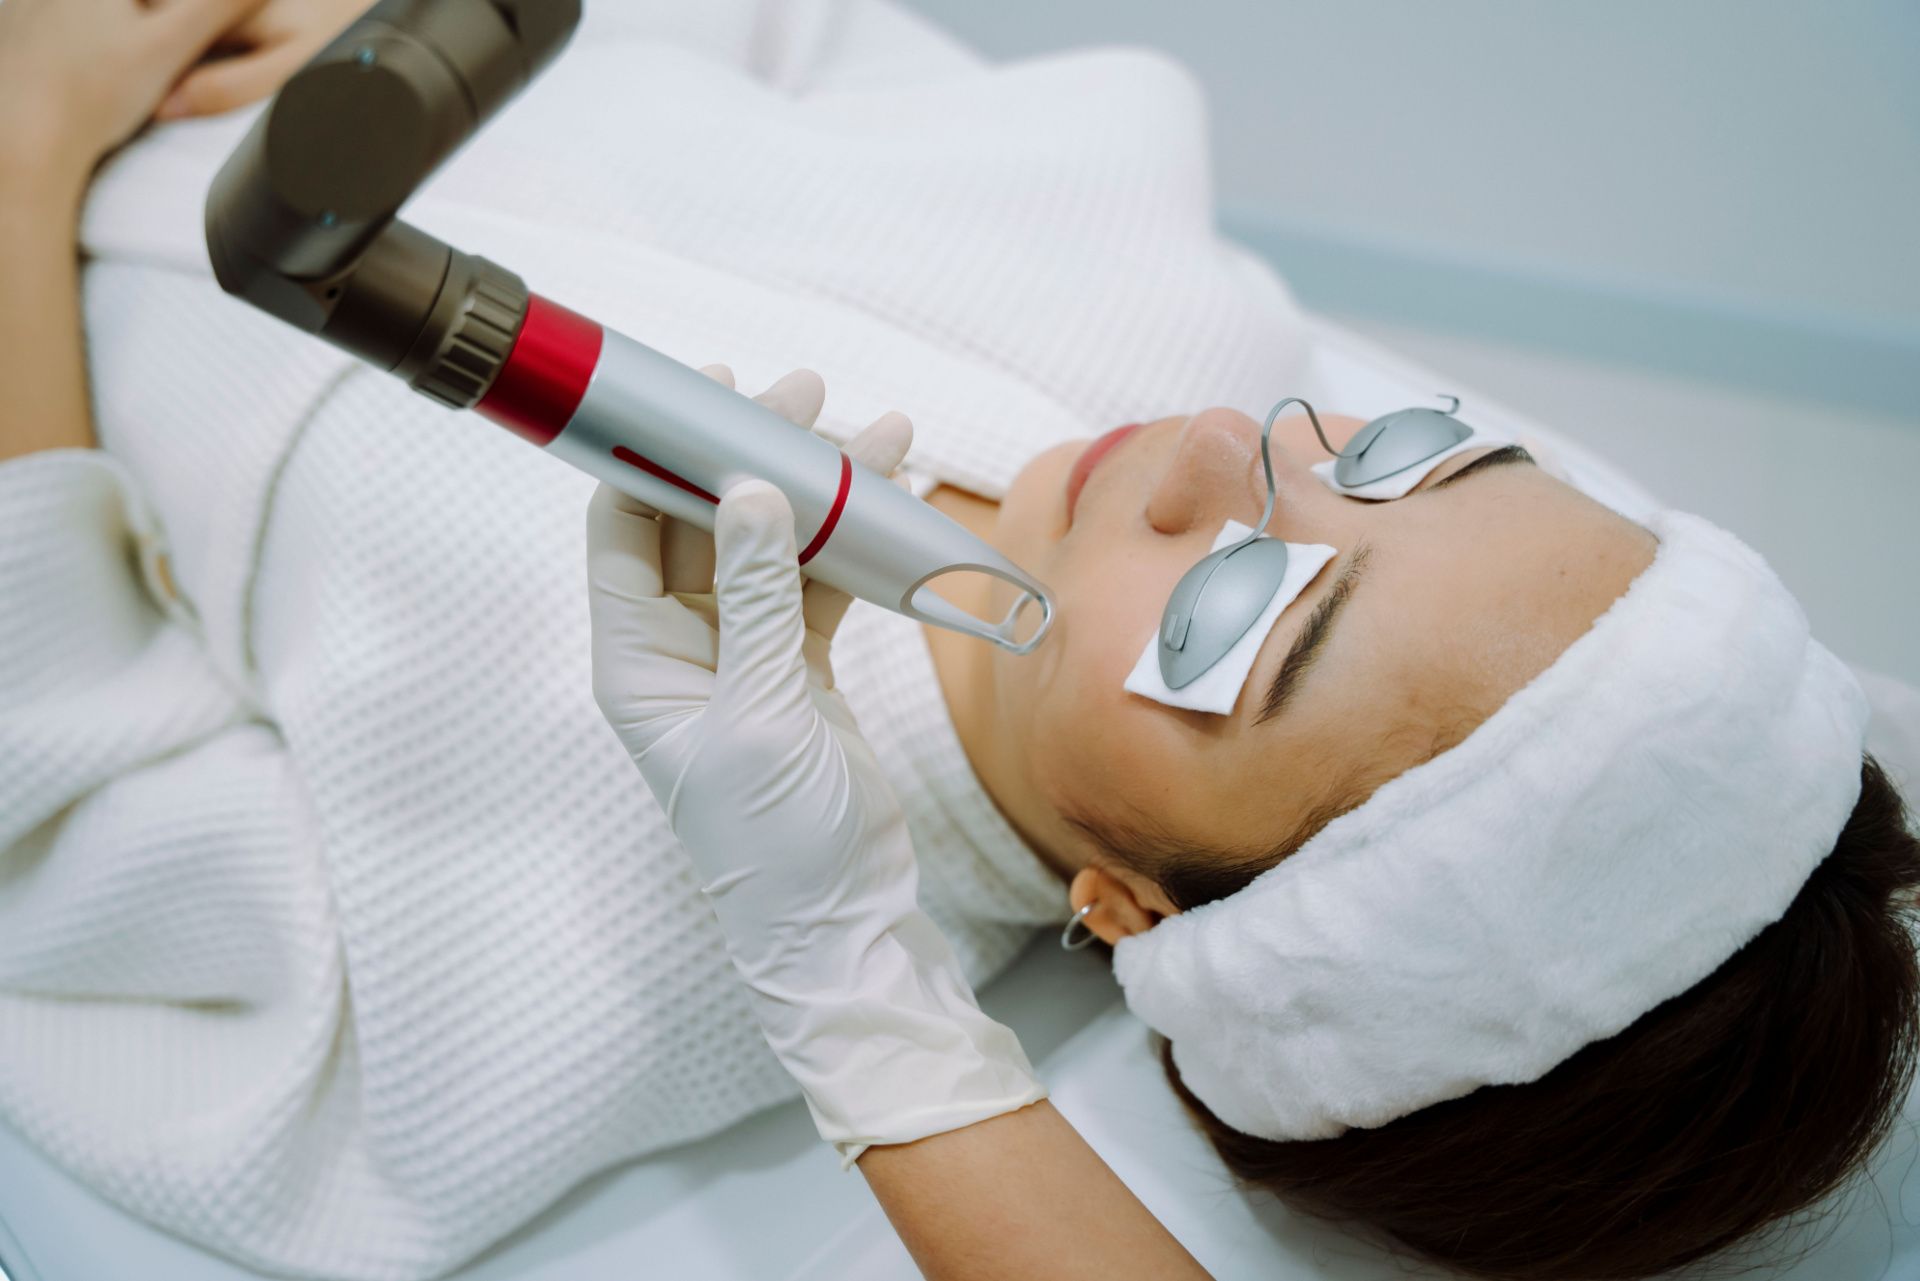 a woman is getting a laser treatment on her face .